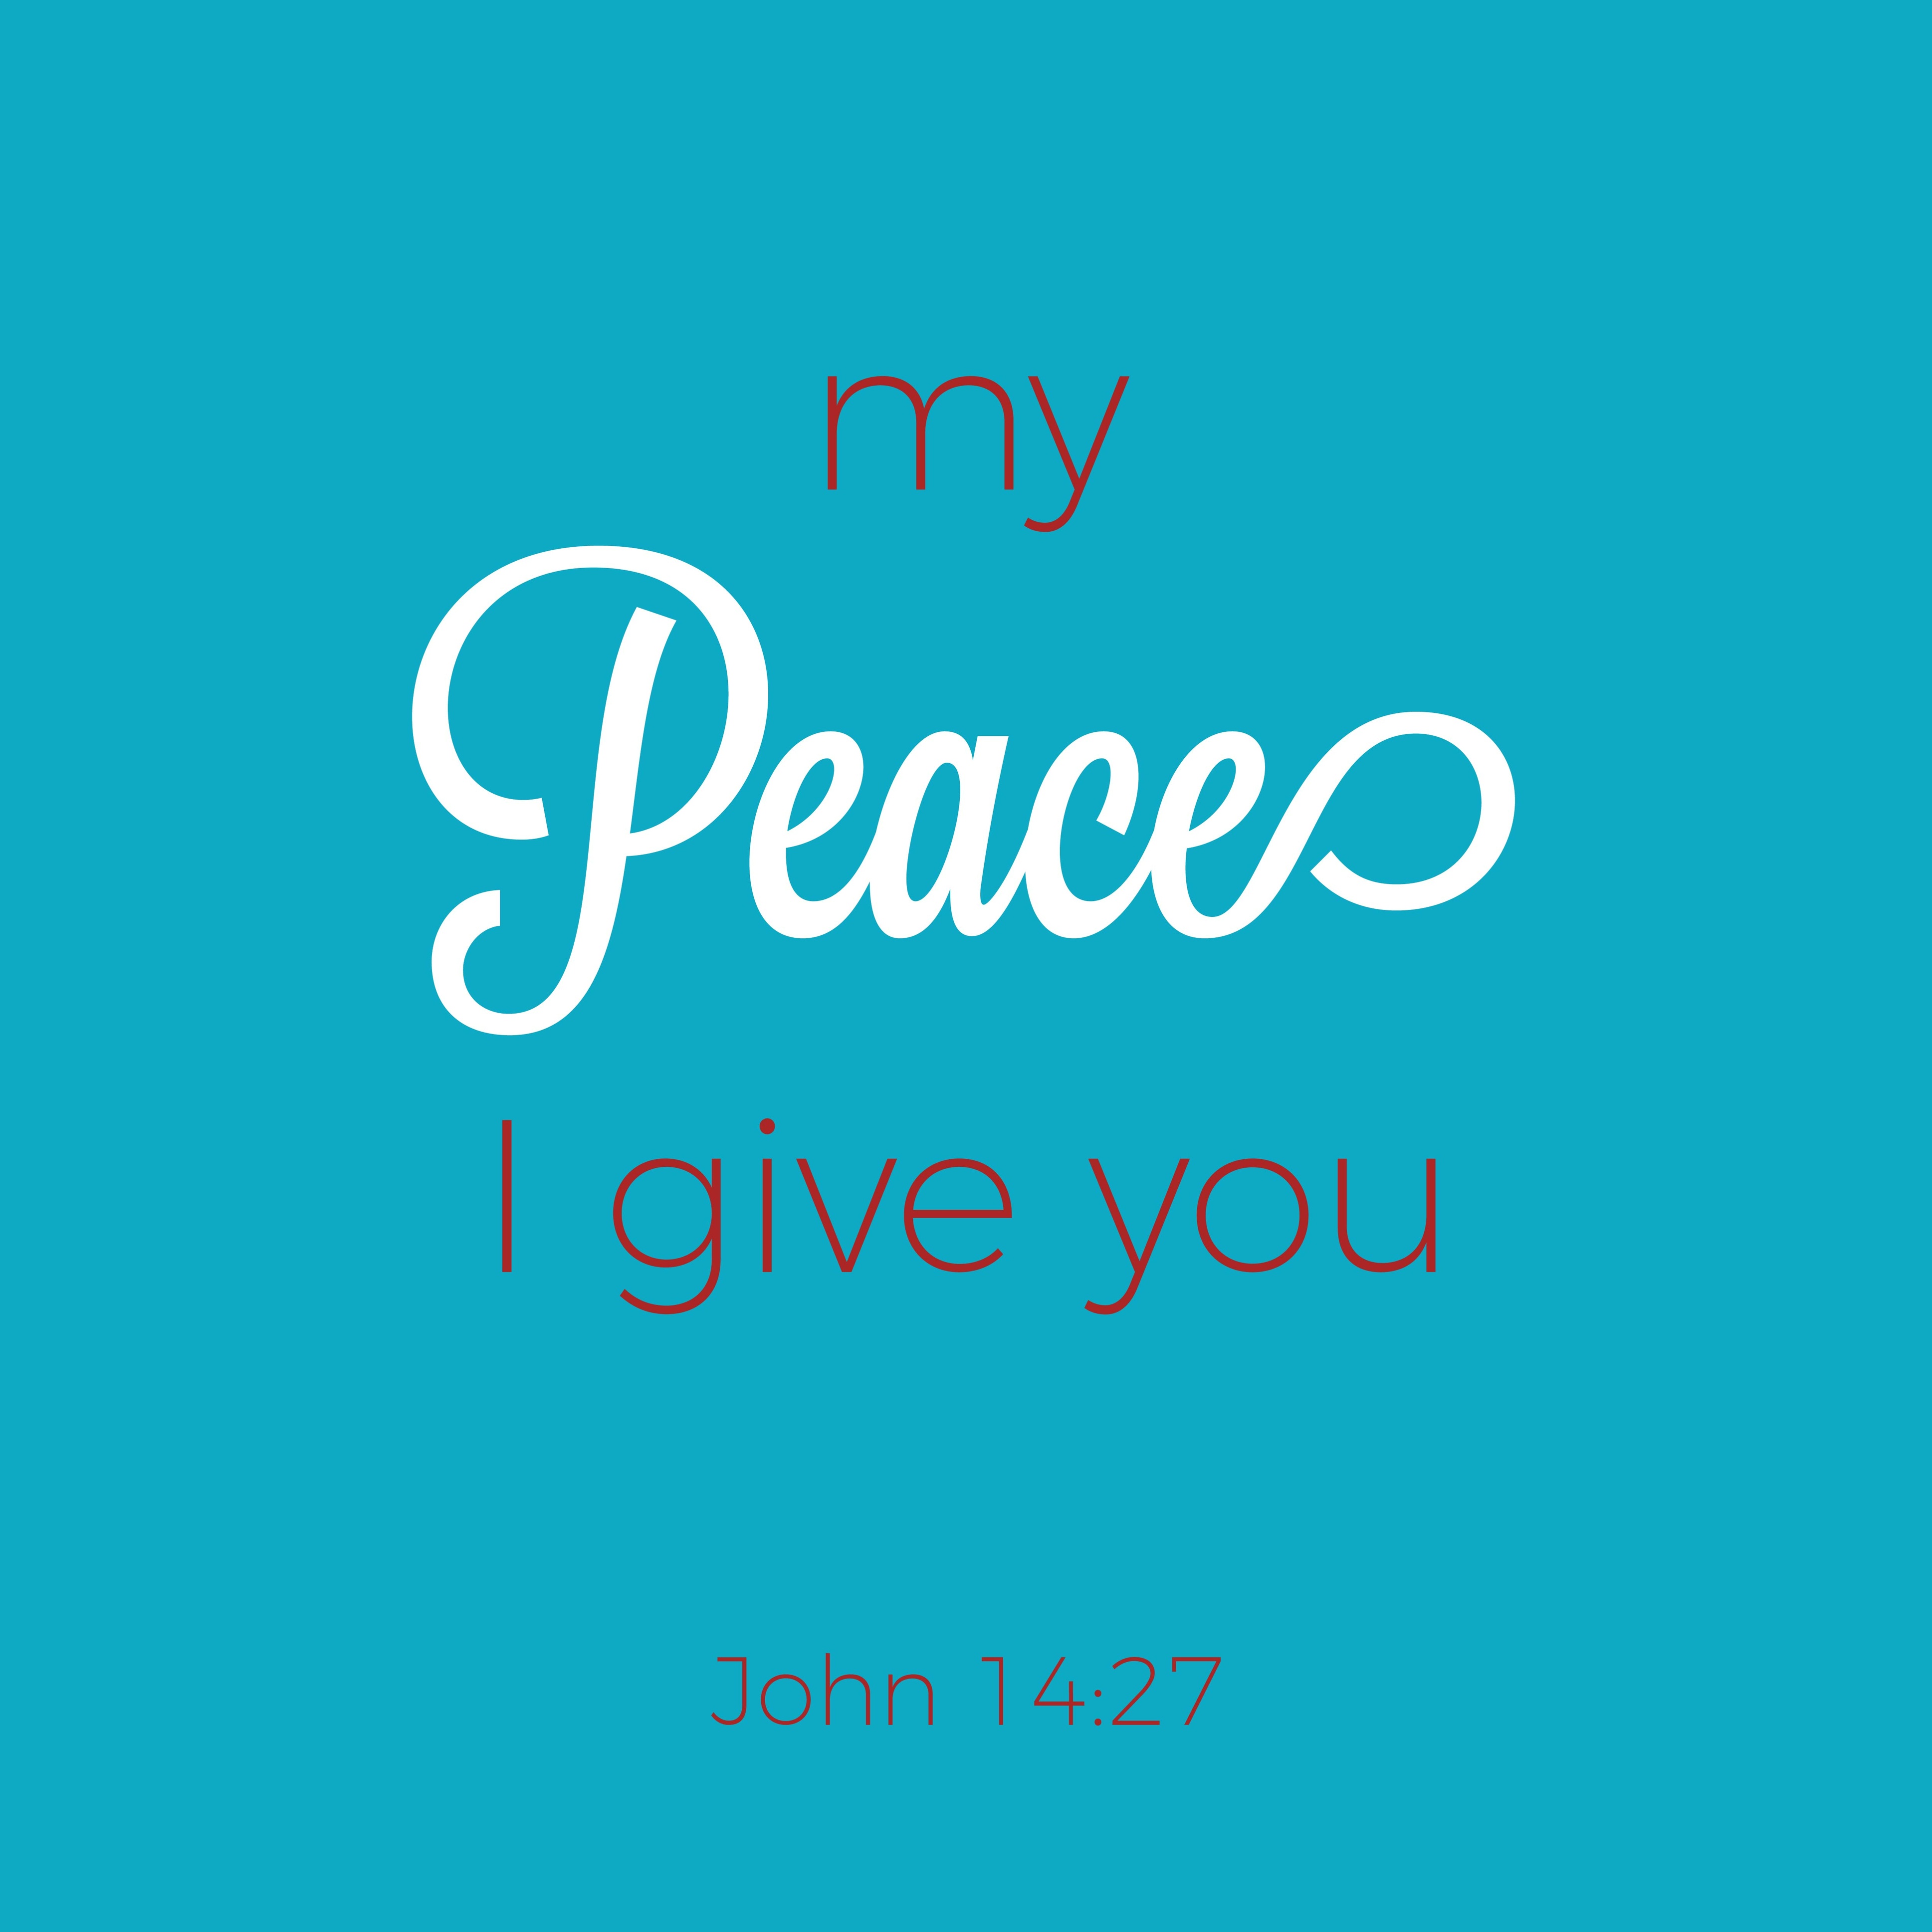 A drawing with the phrase "my peace I give to you" from John 14:27